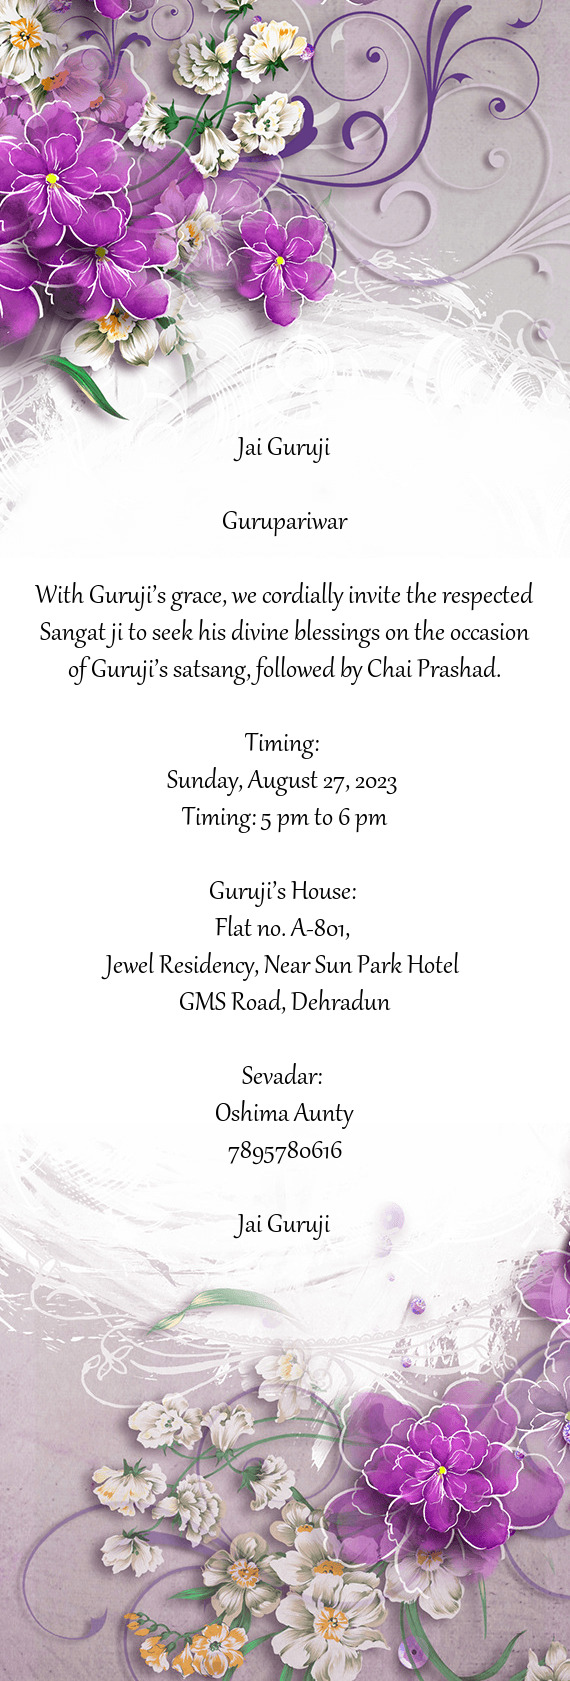 With Guruji’s grace, we cordially invite the respected Sangat ji to seek his divine blessings on t